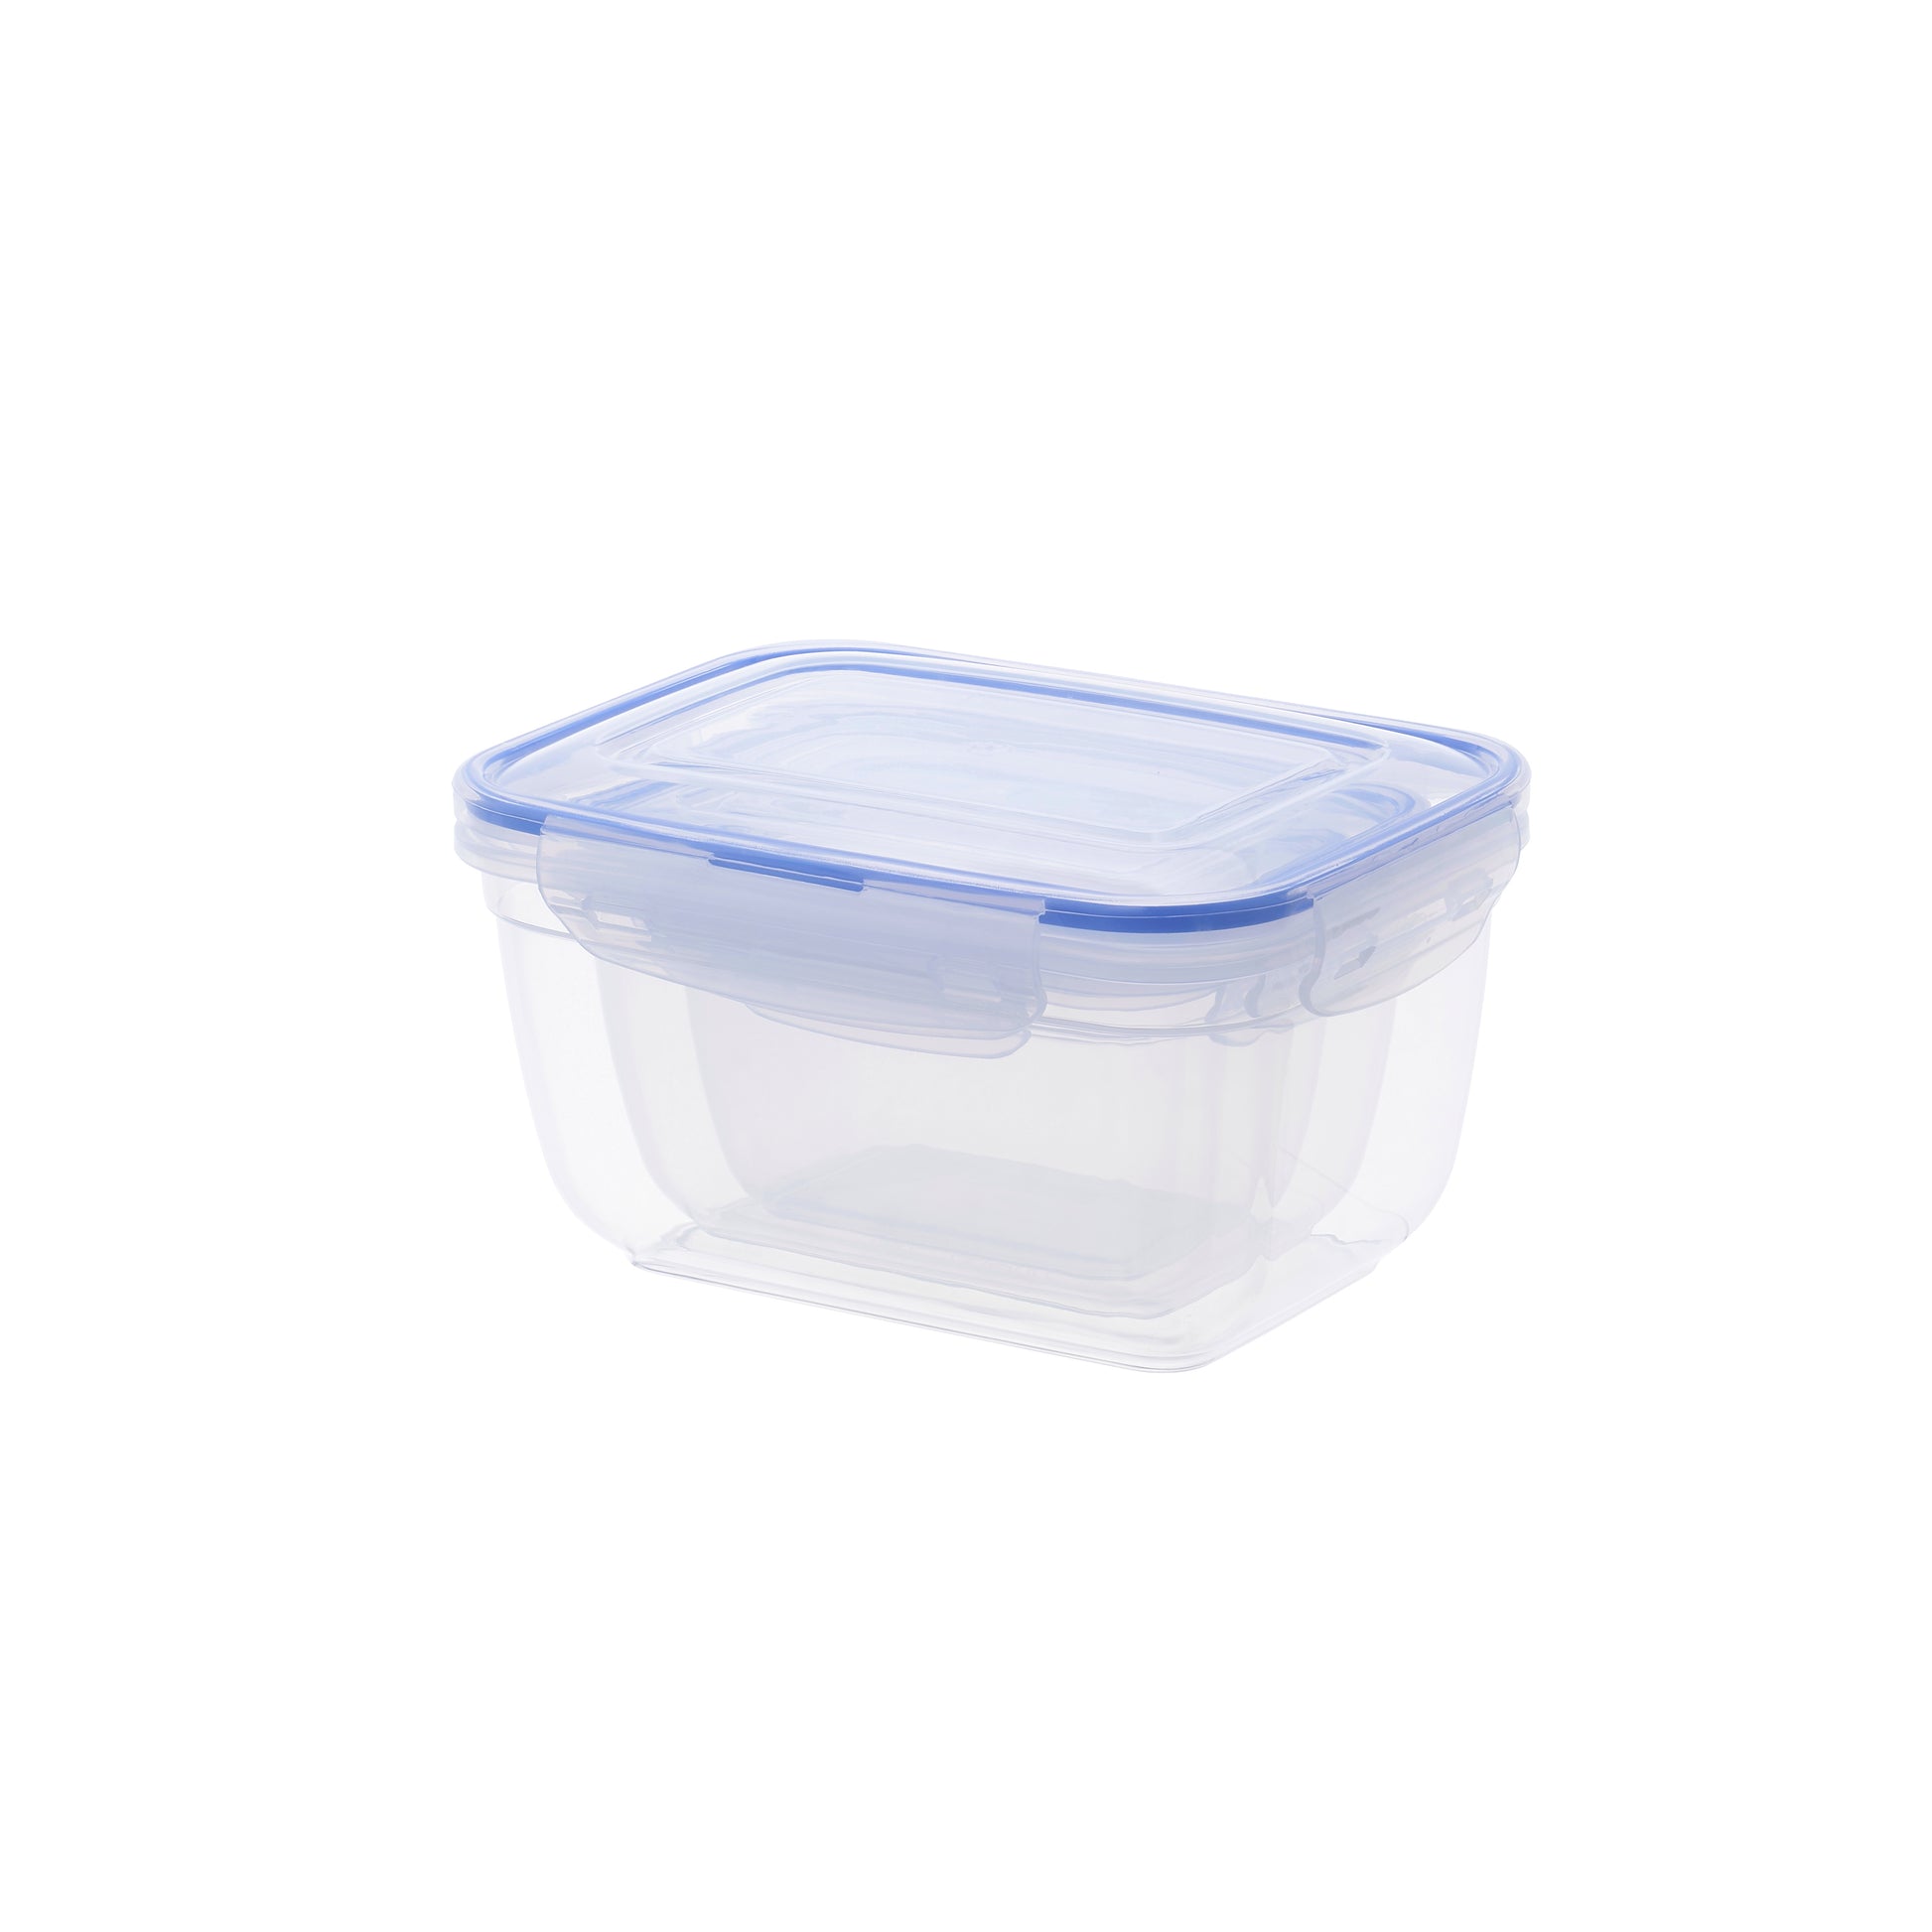 3 PCS Airtight Food Storage Containers With Lids Durable Plastic Food  Containers Set Leak Proof Guaranteed